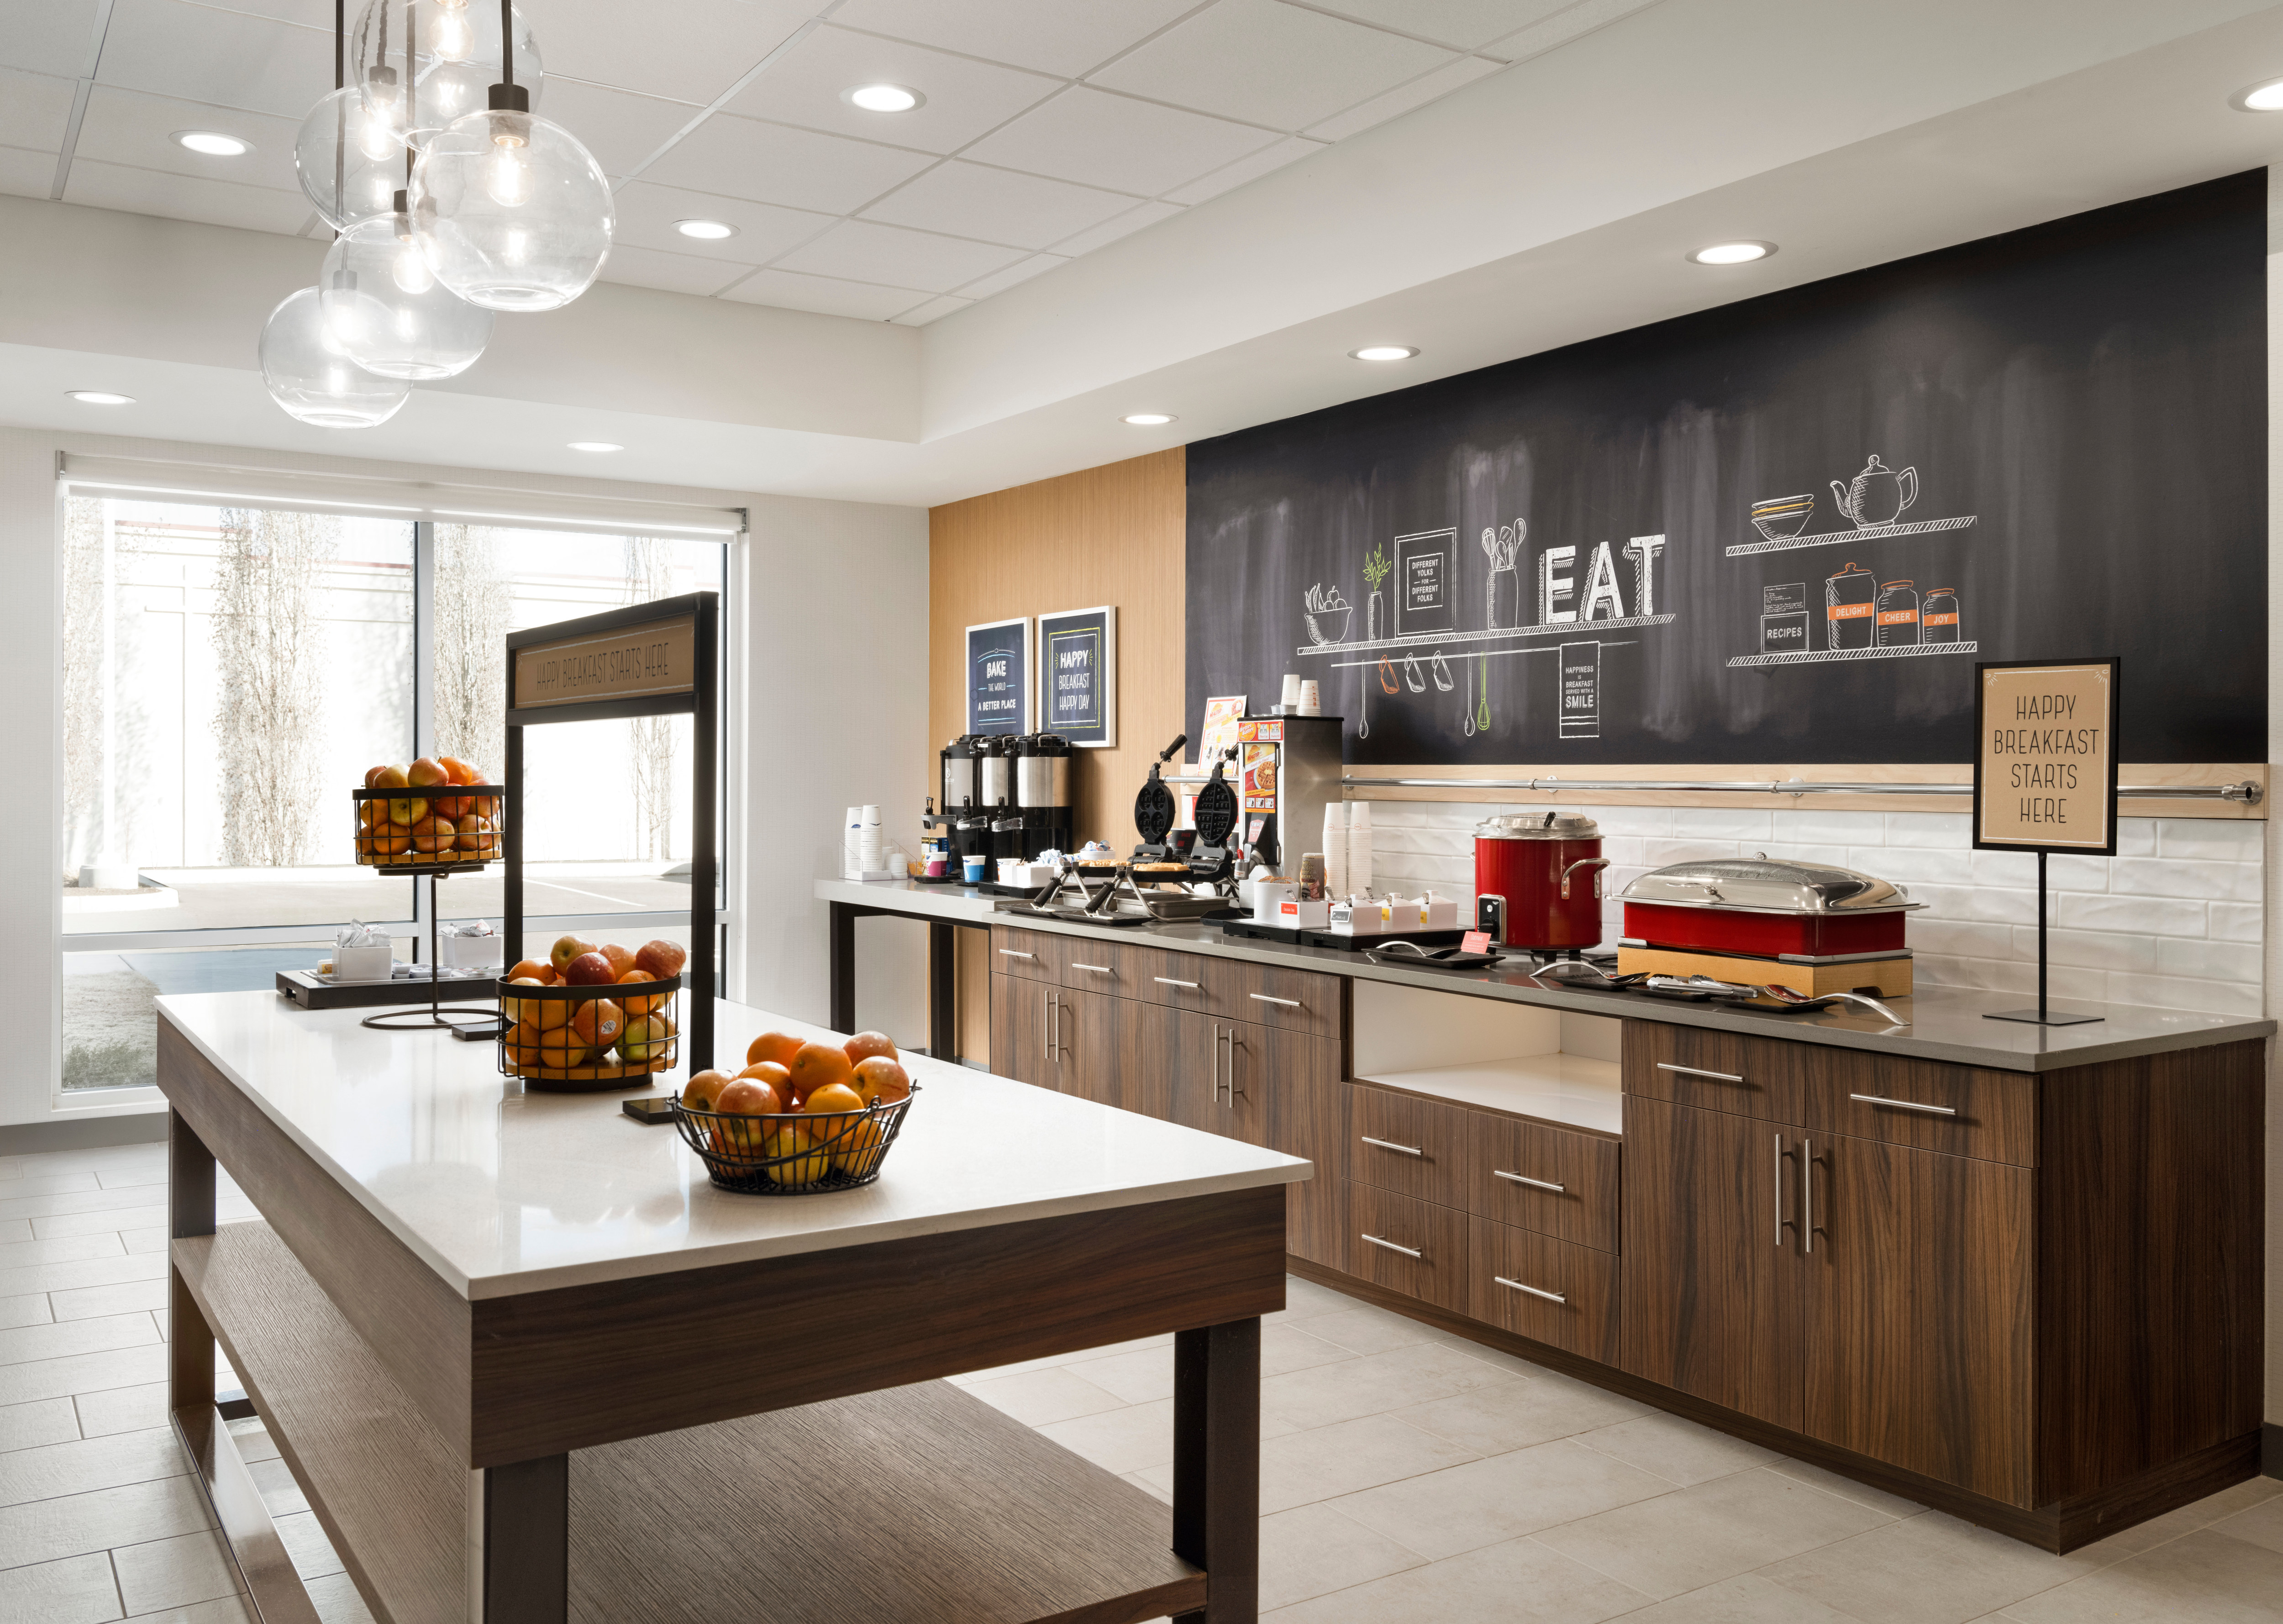 Breakfast Bar Area with Fresh Fruits and Hot Foods